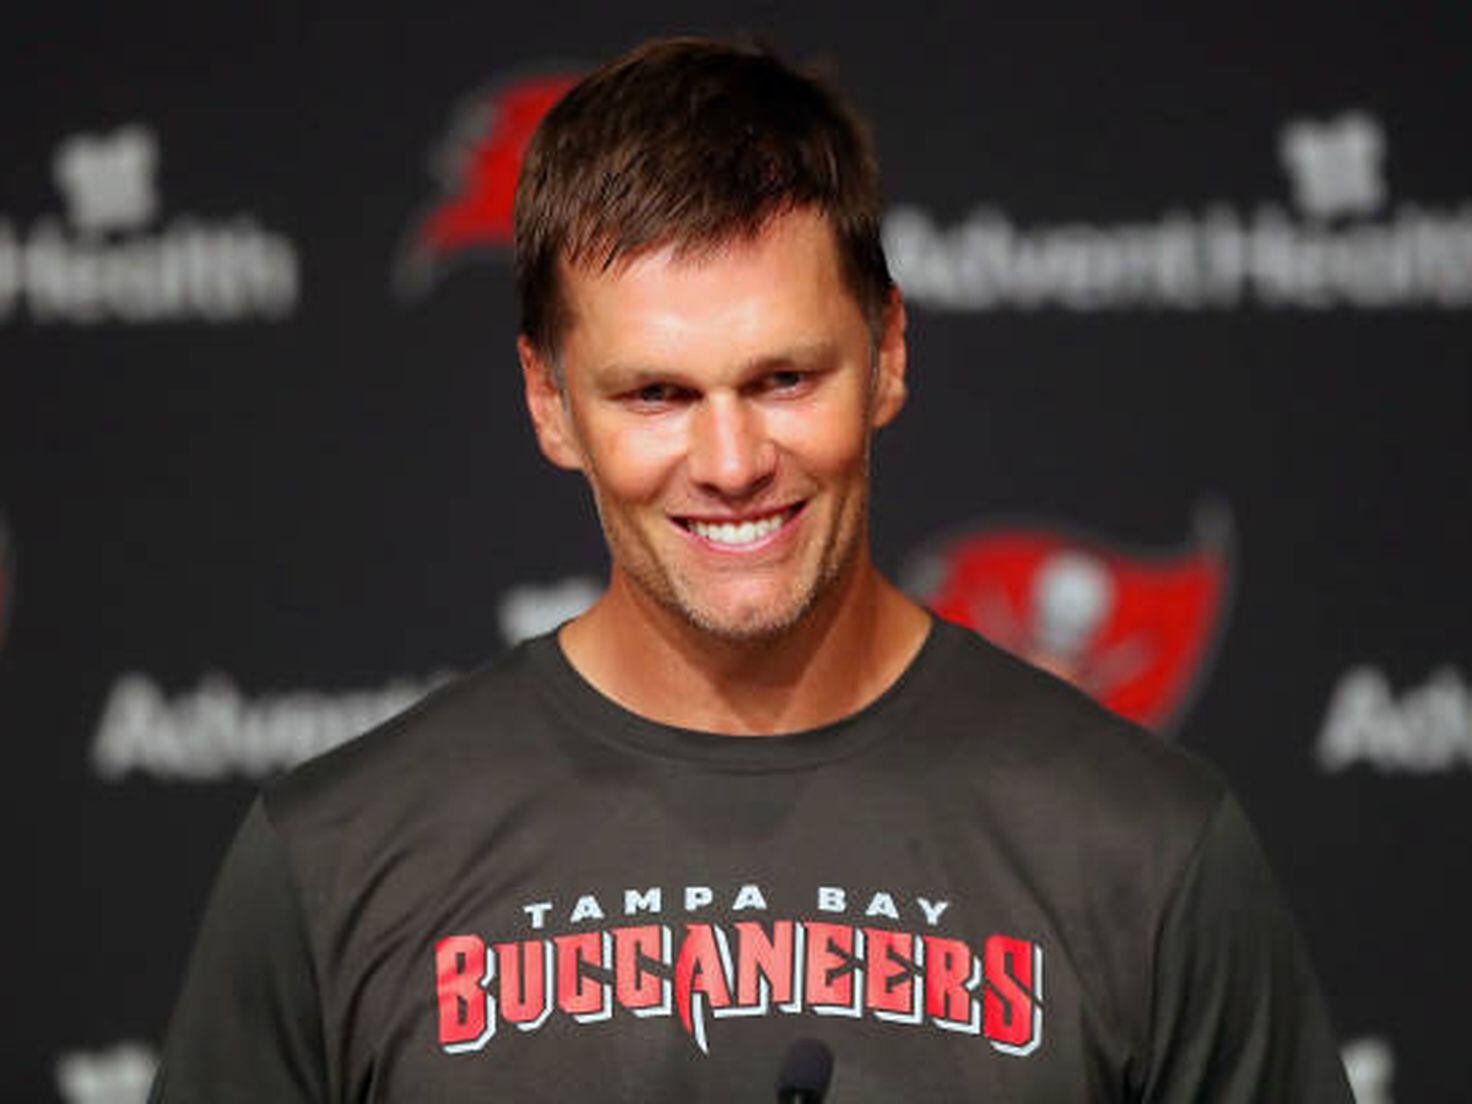 Tom Brady changes mind on NFL retirement, will return to Buccaneers